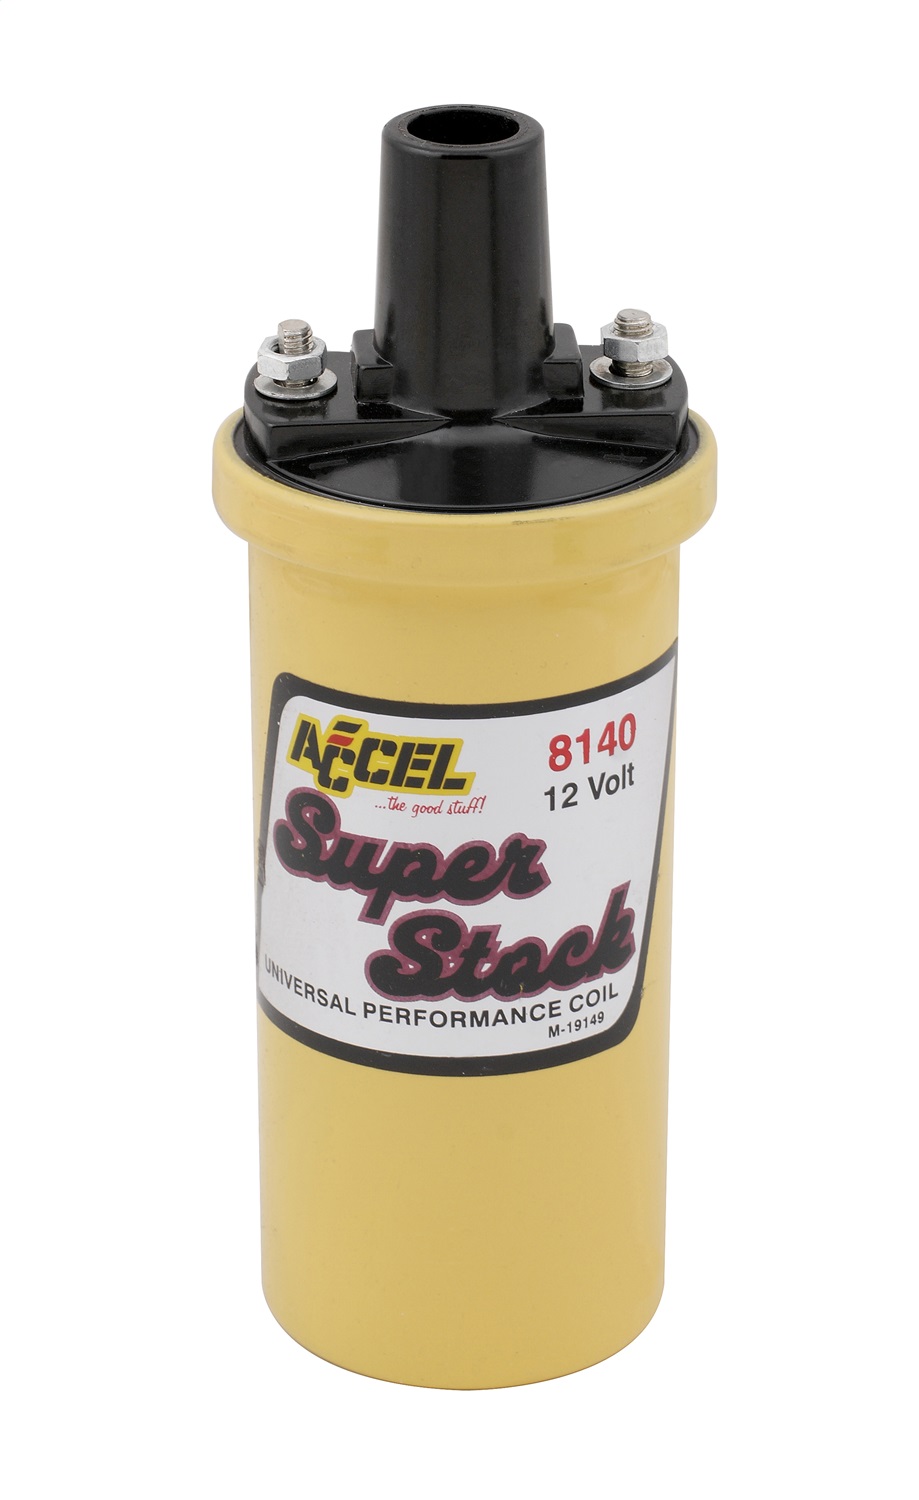 Super Stock Universal Performance Coil - 8140